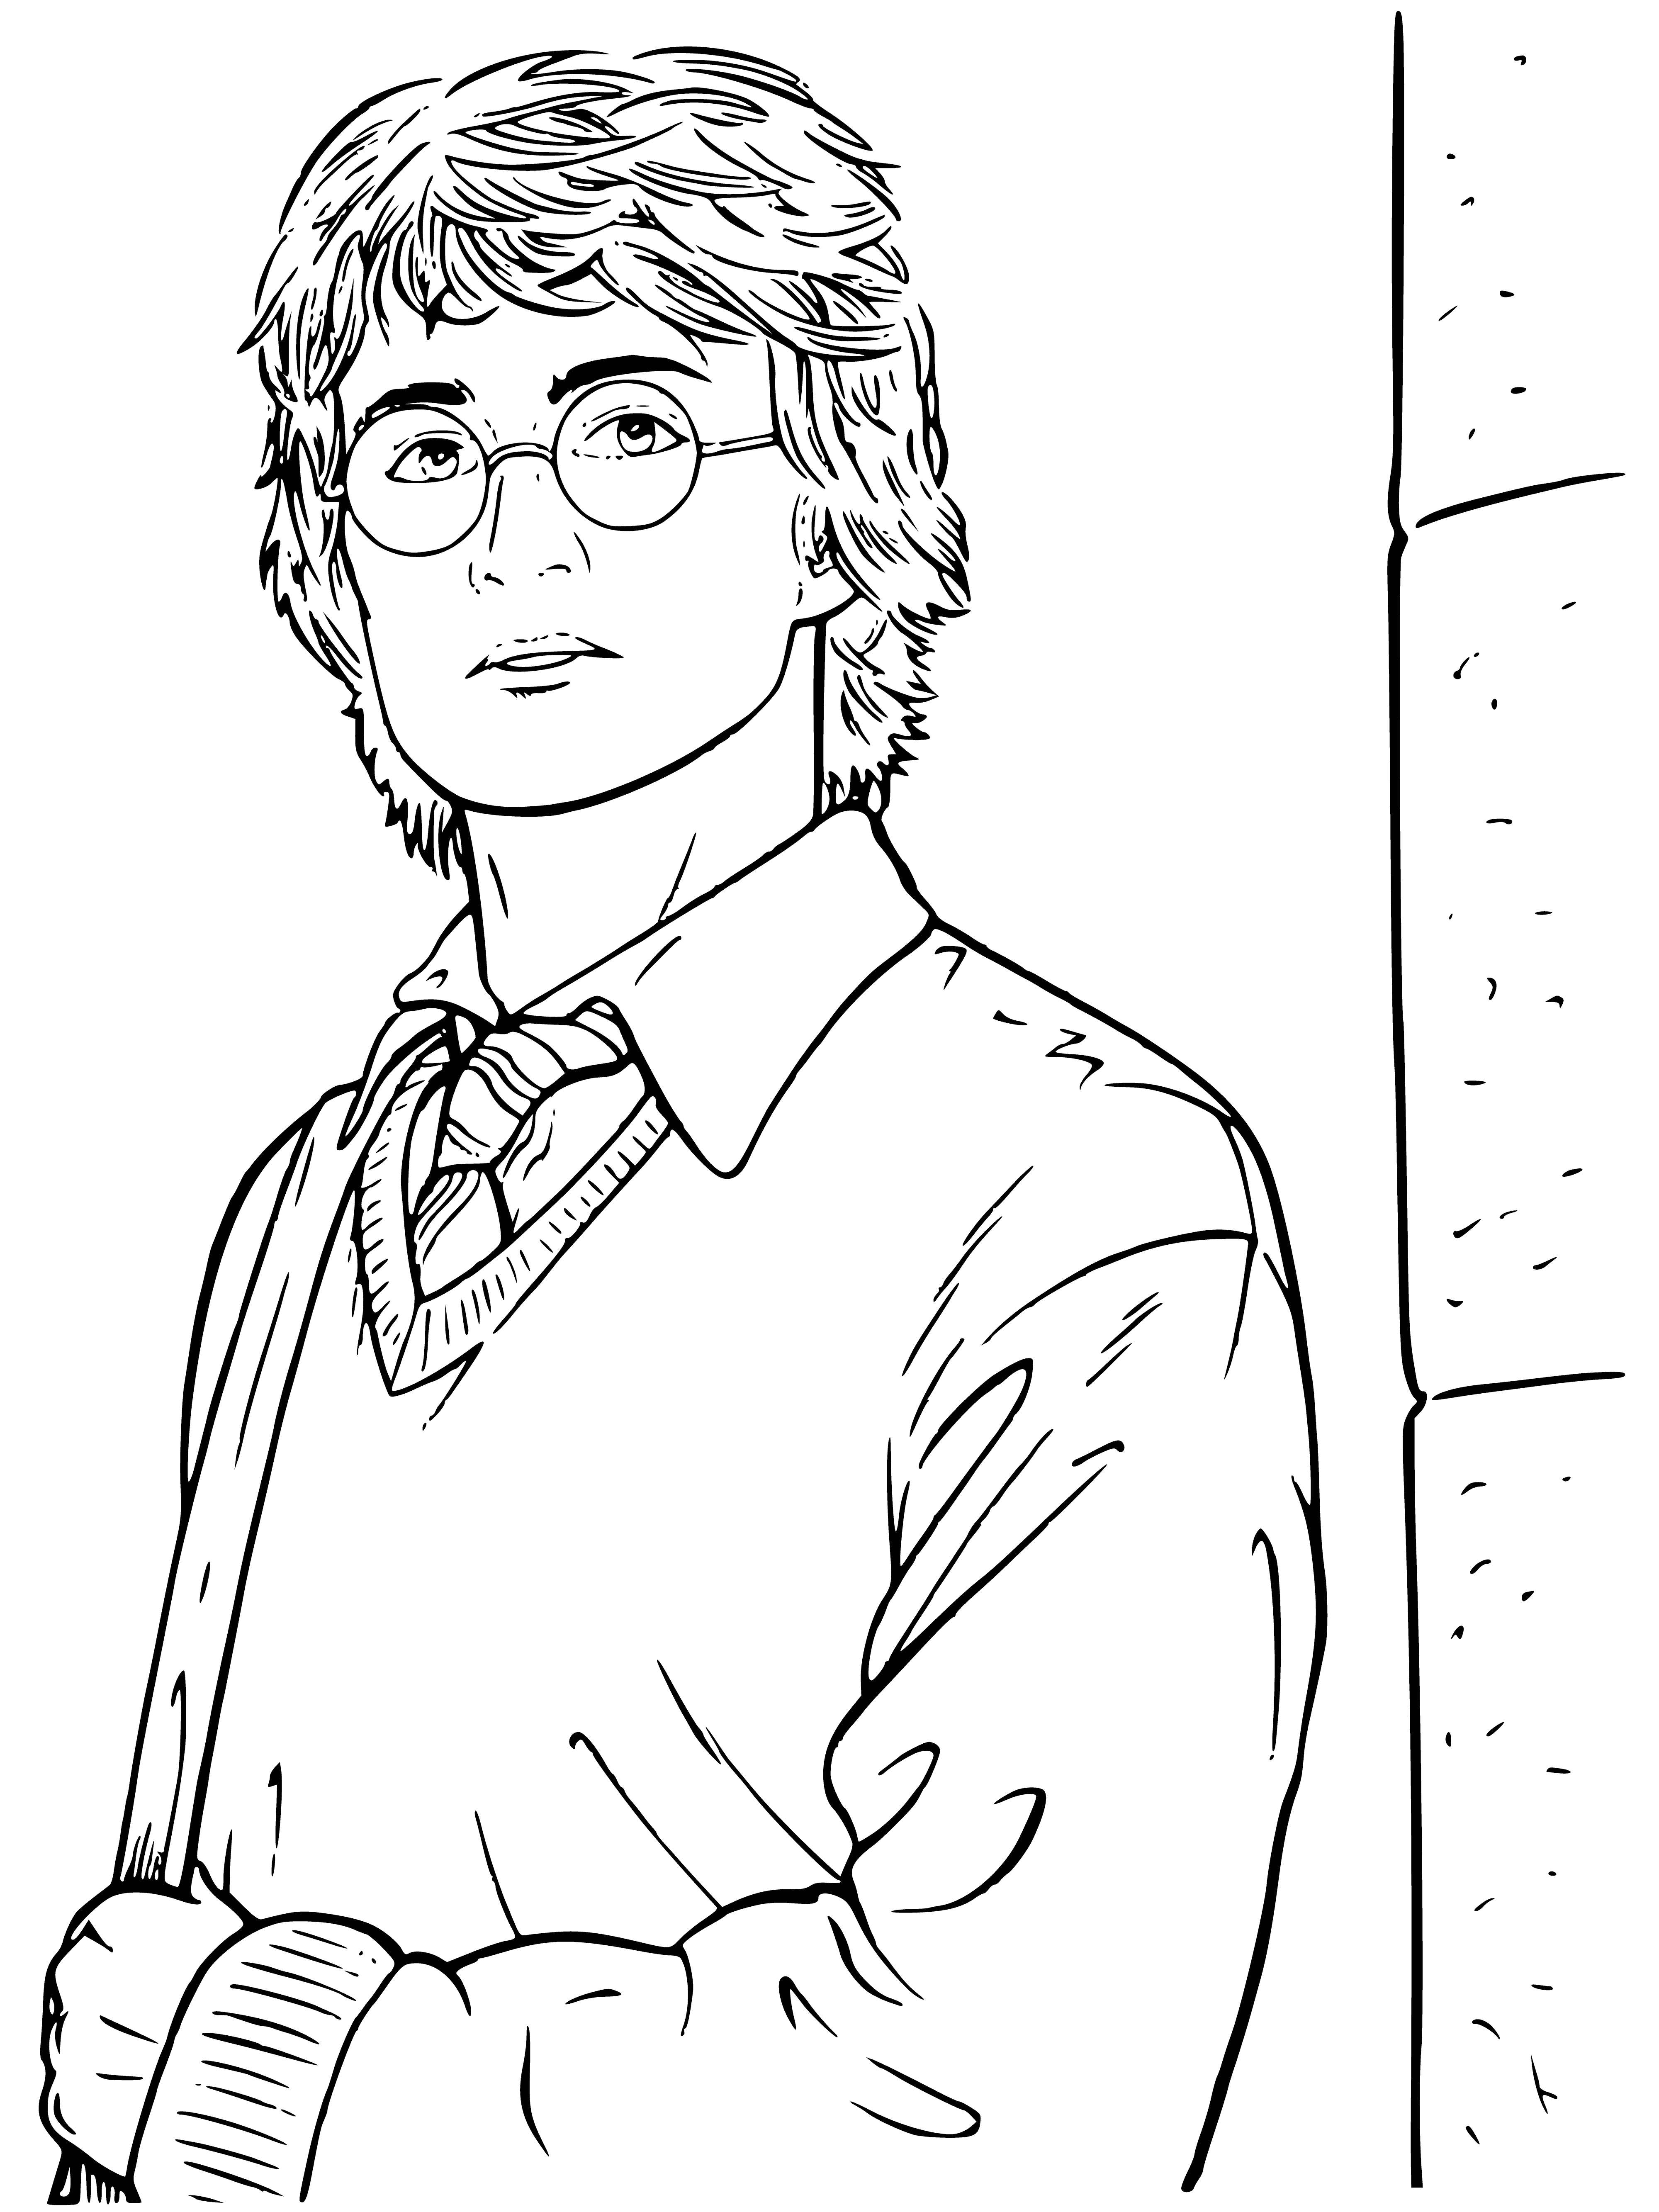 coloring page: Harry Potter, wearing a black robe and scar, wand outstretched, stands in a room with a door to the left and windows behind.